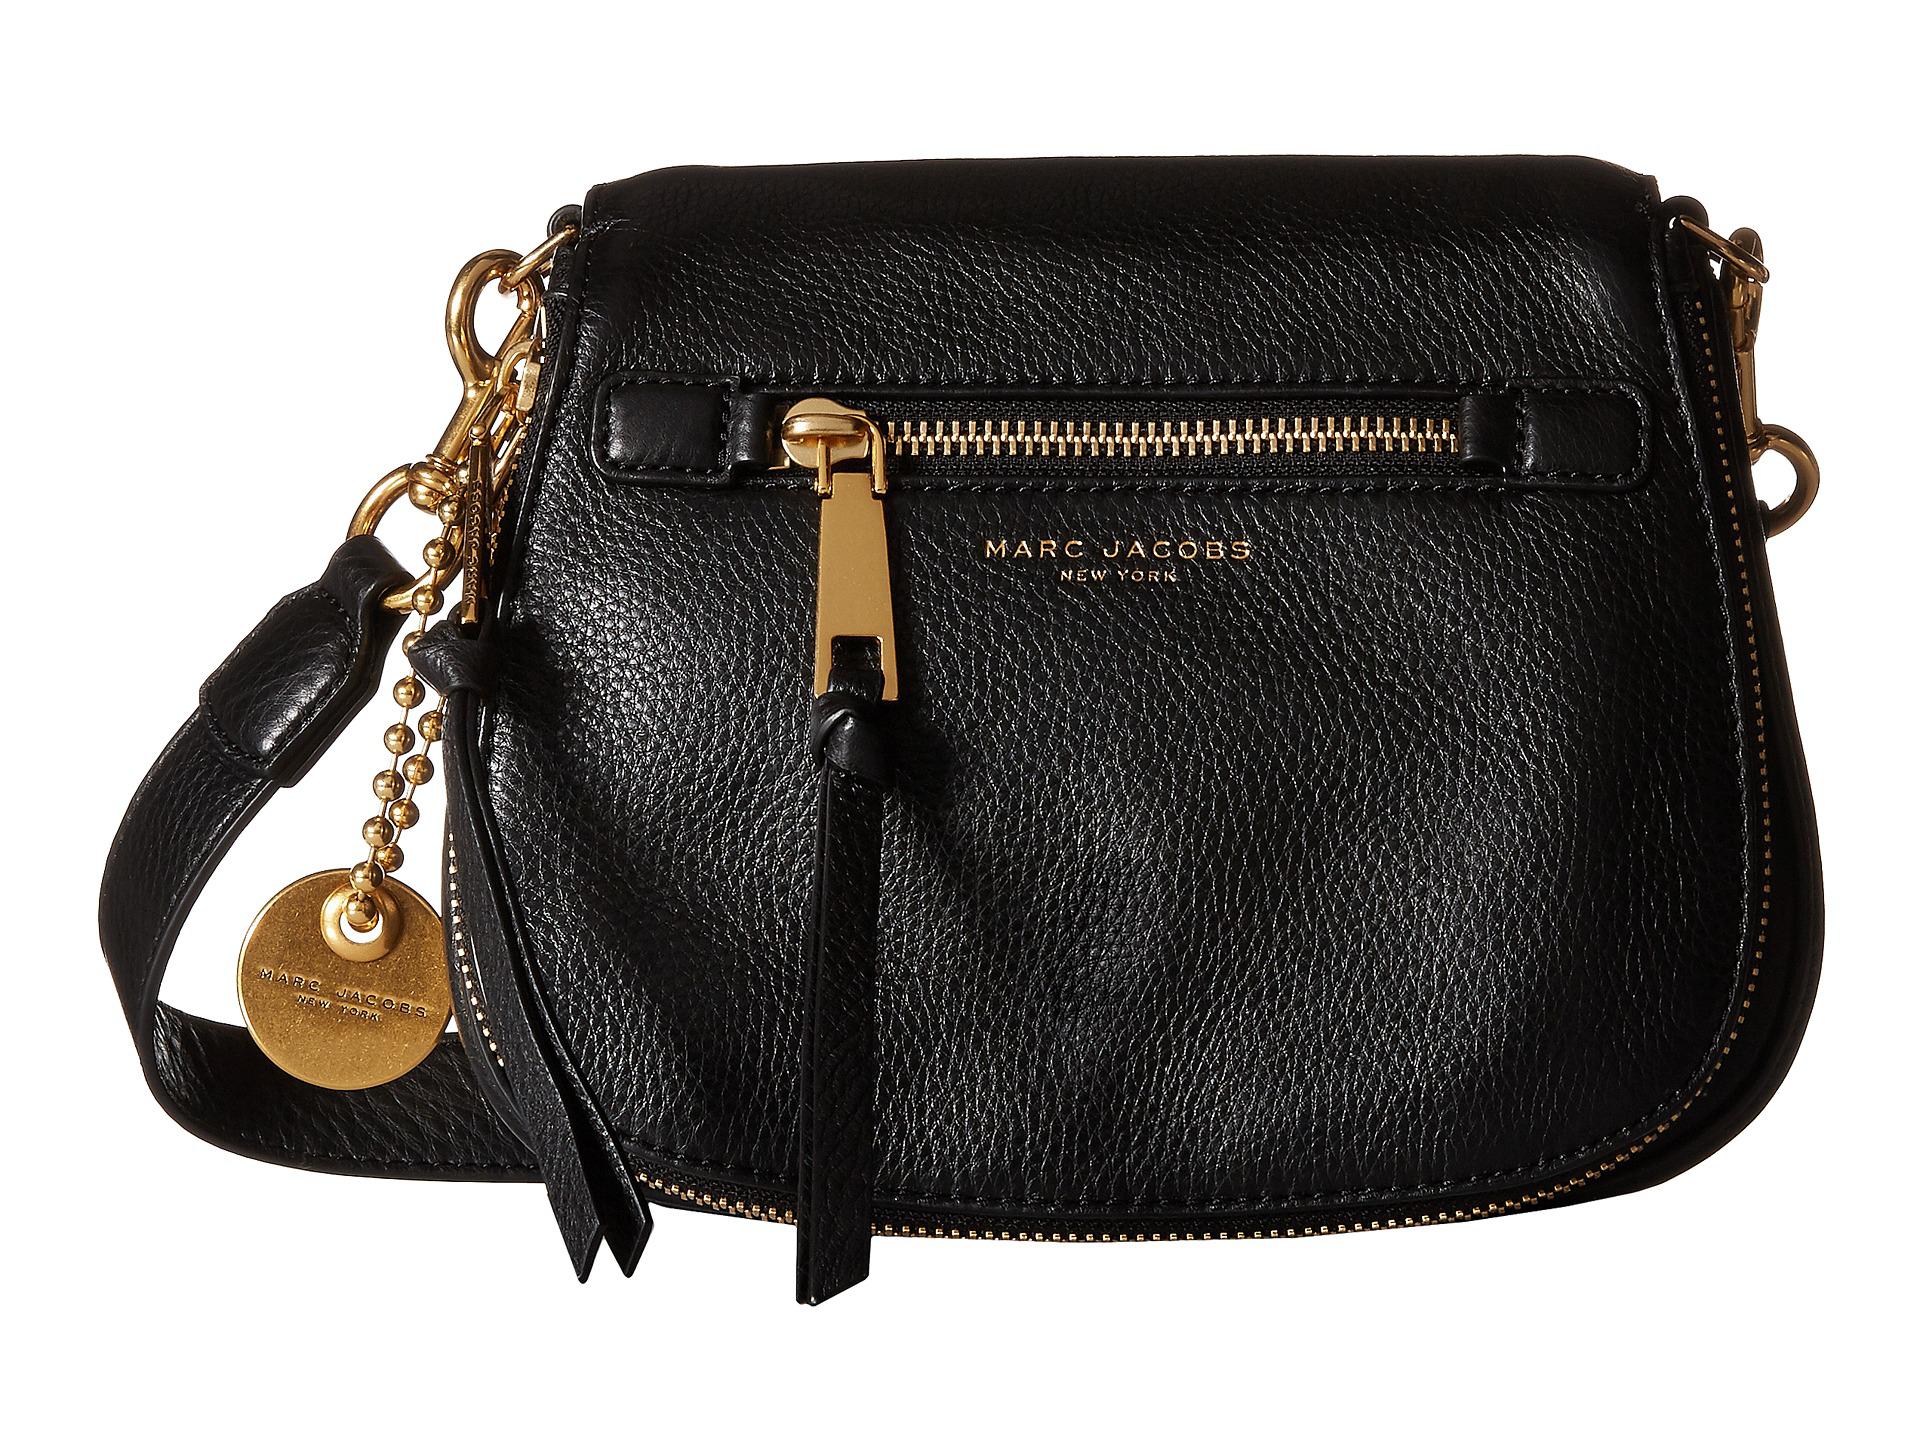 Marc Jacobs Recruit Small Saddle Bag in Black - Lyst